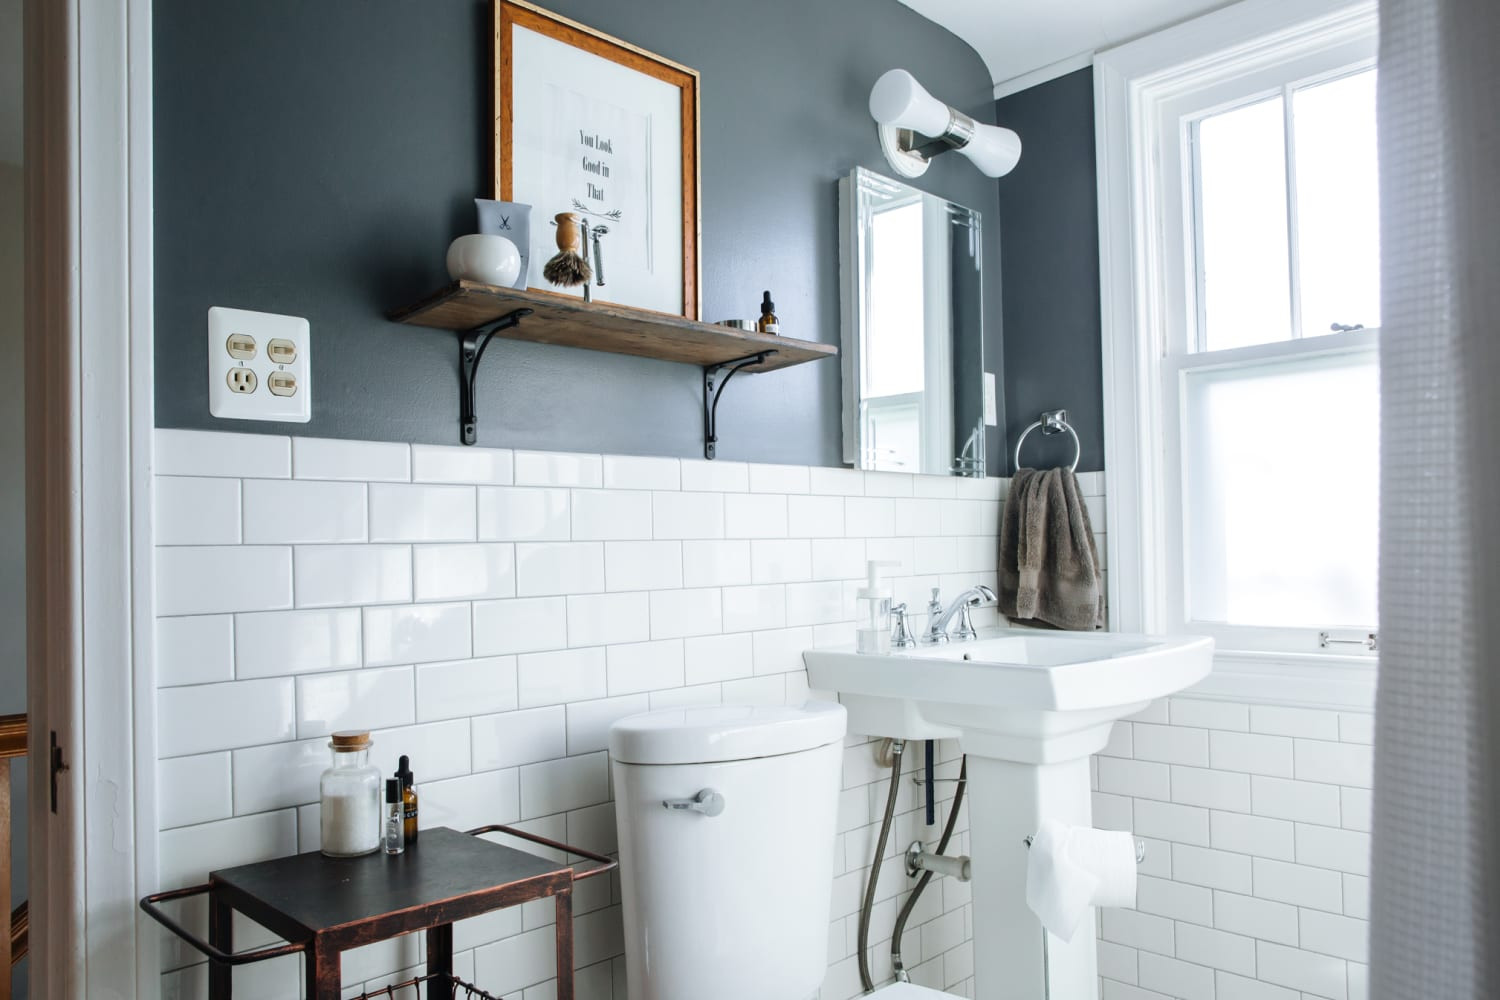 Best Paint For Bathroom
 Best Paint Colors for Small Bathrooms